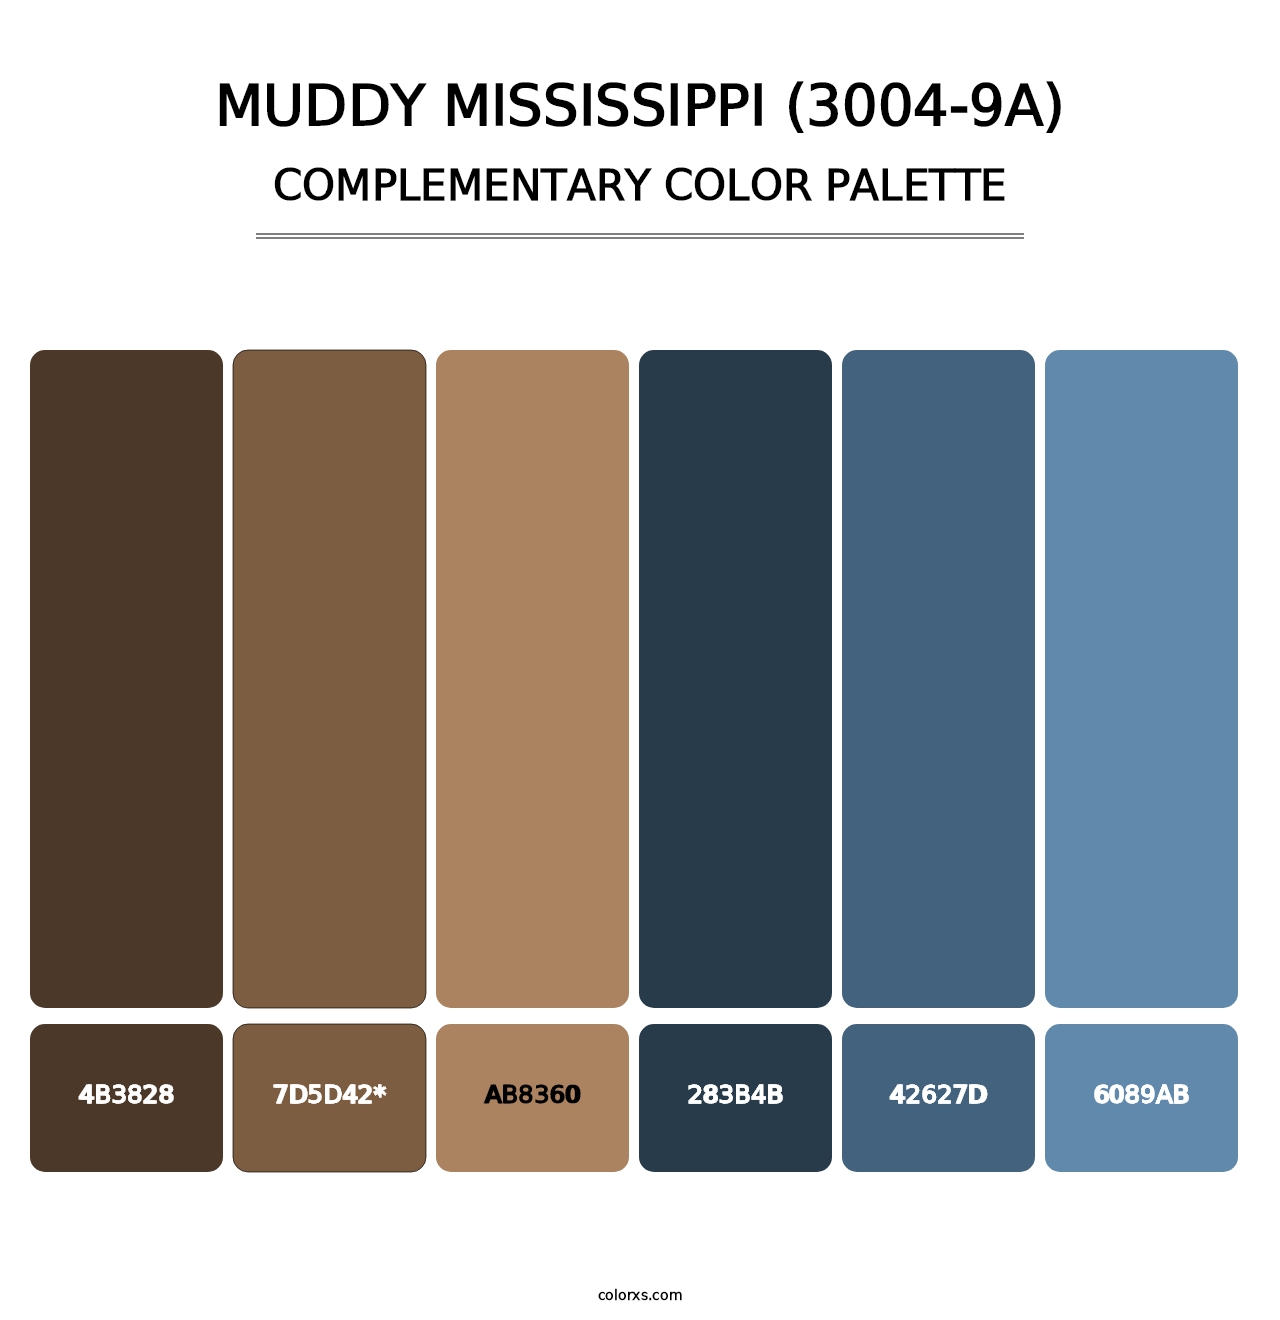 Muddy Mississippi (3004-9A) - Complementary Color Palette